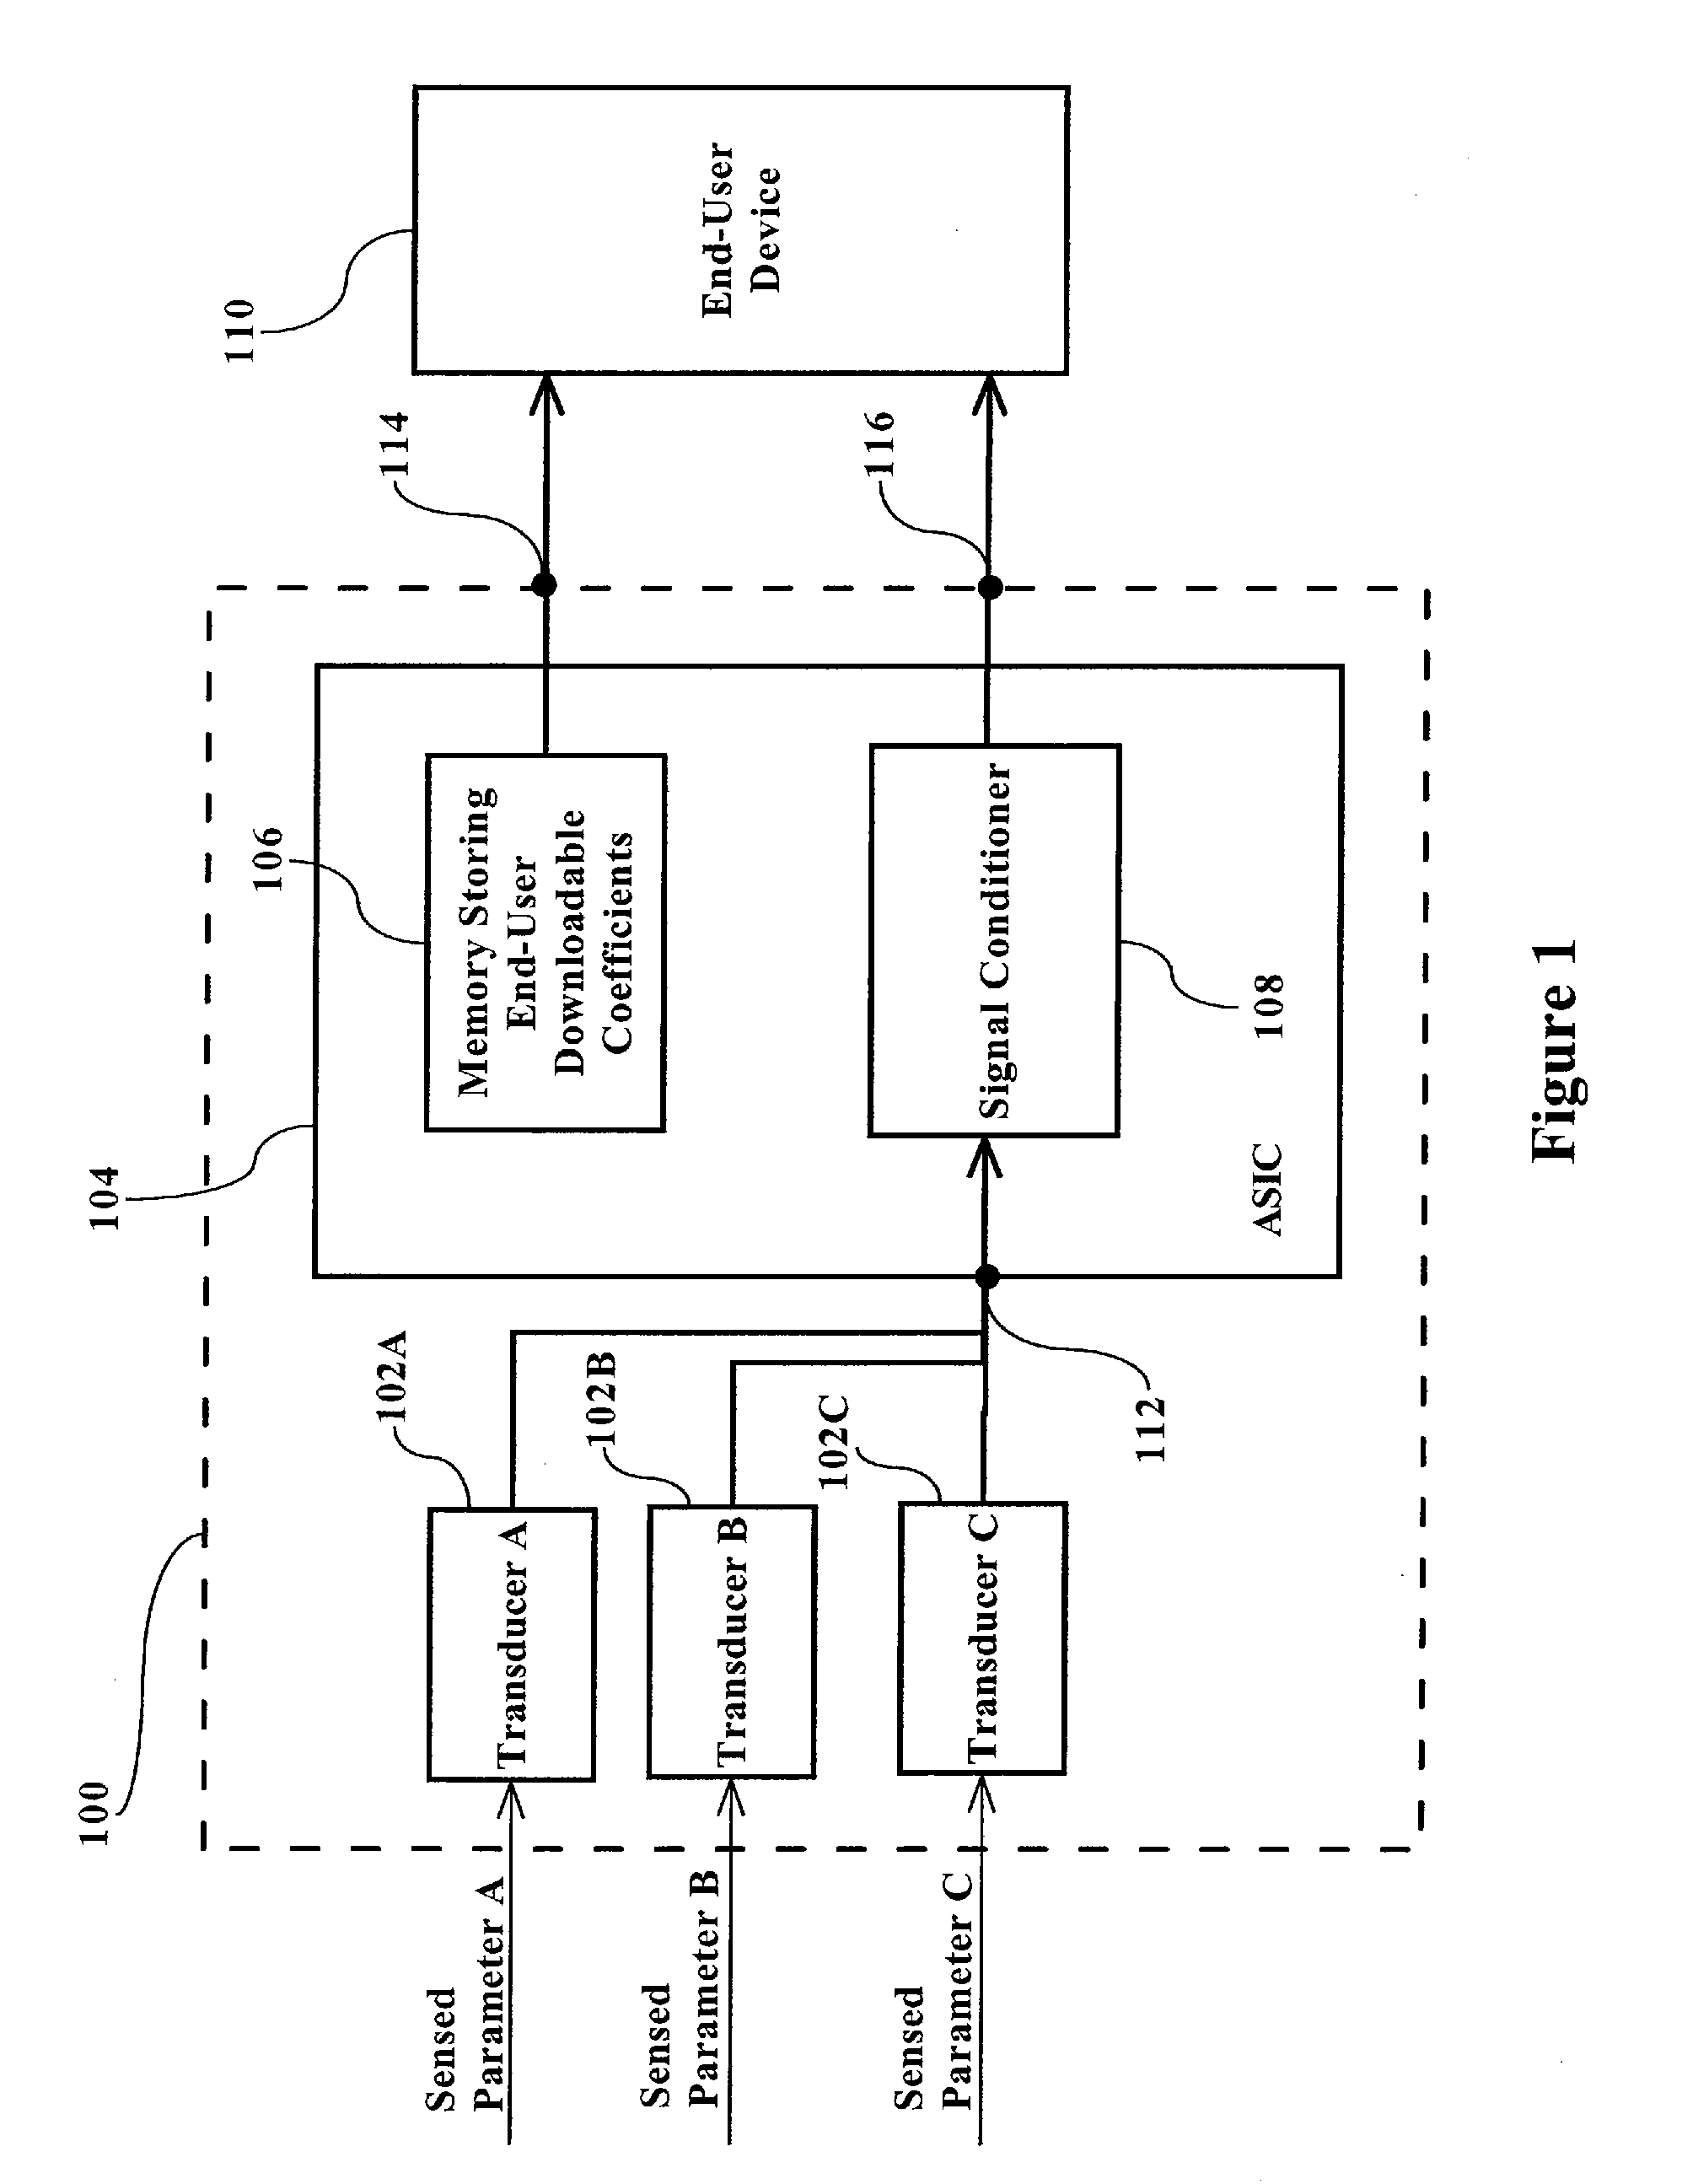 Flow sensor with conditioning-coefficient memory